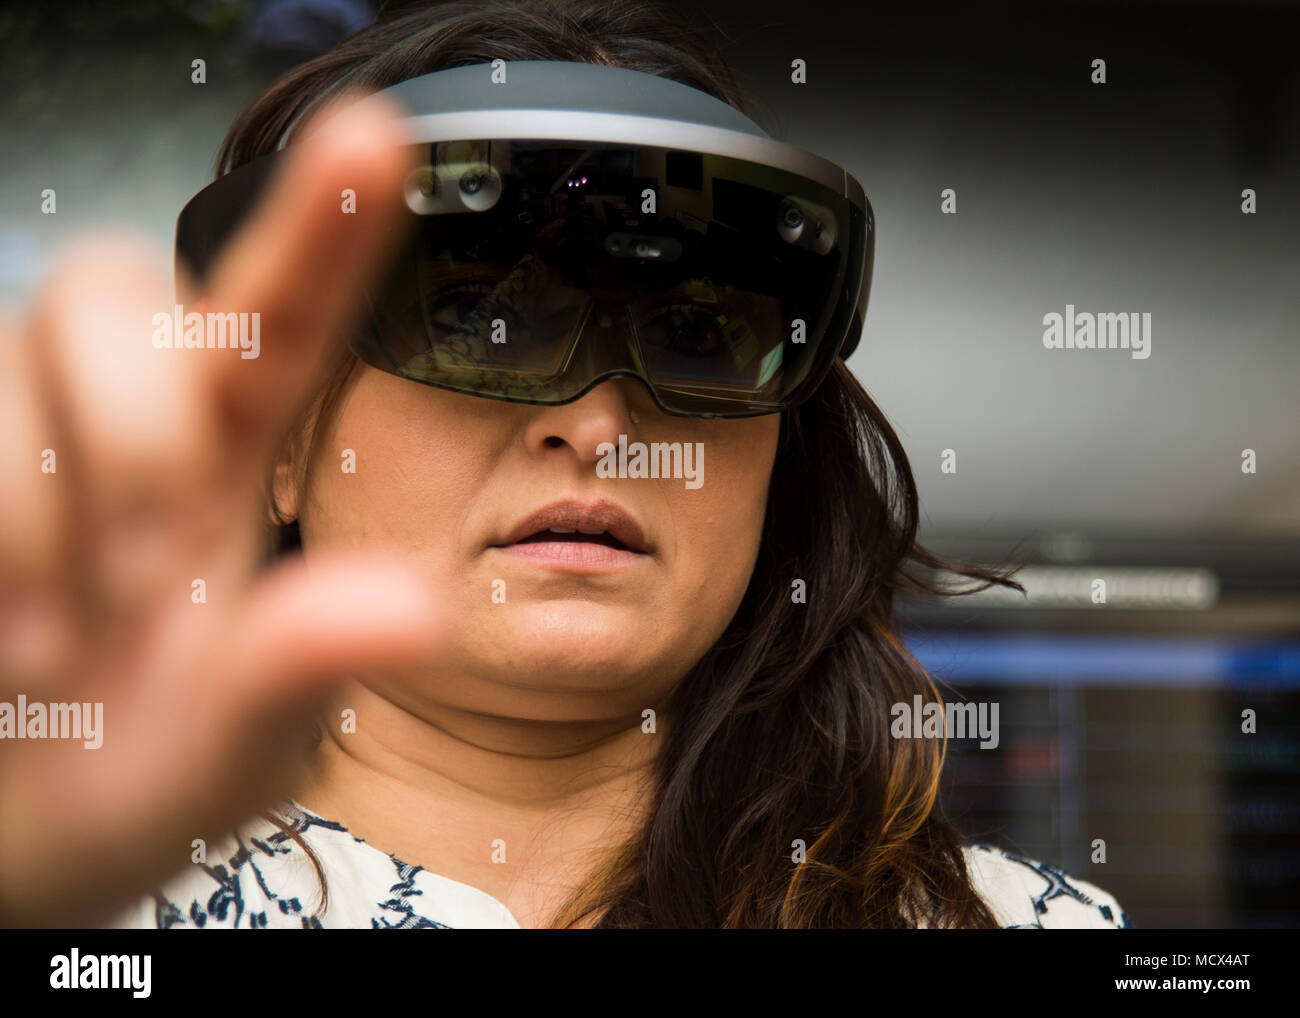 180302-N-PN275-1057 SAN DIEGO (March 02, 2018) Hiral Beg, a registered nurse in Naval Medical Center San Diego Tele-Critical Care Unit, demonstrates how to use the Microsoft Hololens a wearable augmented reality device. The Hololens is shares information between on site personnel and remote physicians, allowing for the physicians the make audio and visual guidance. (U.S. Navy Photo by Mass Communication Specialist 2nd Class Zach Kreitzer/Released) Stock Photo